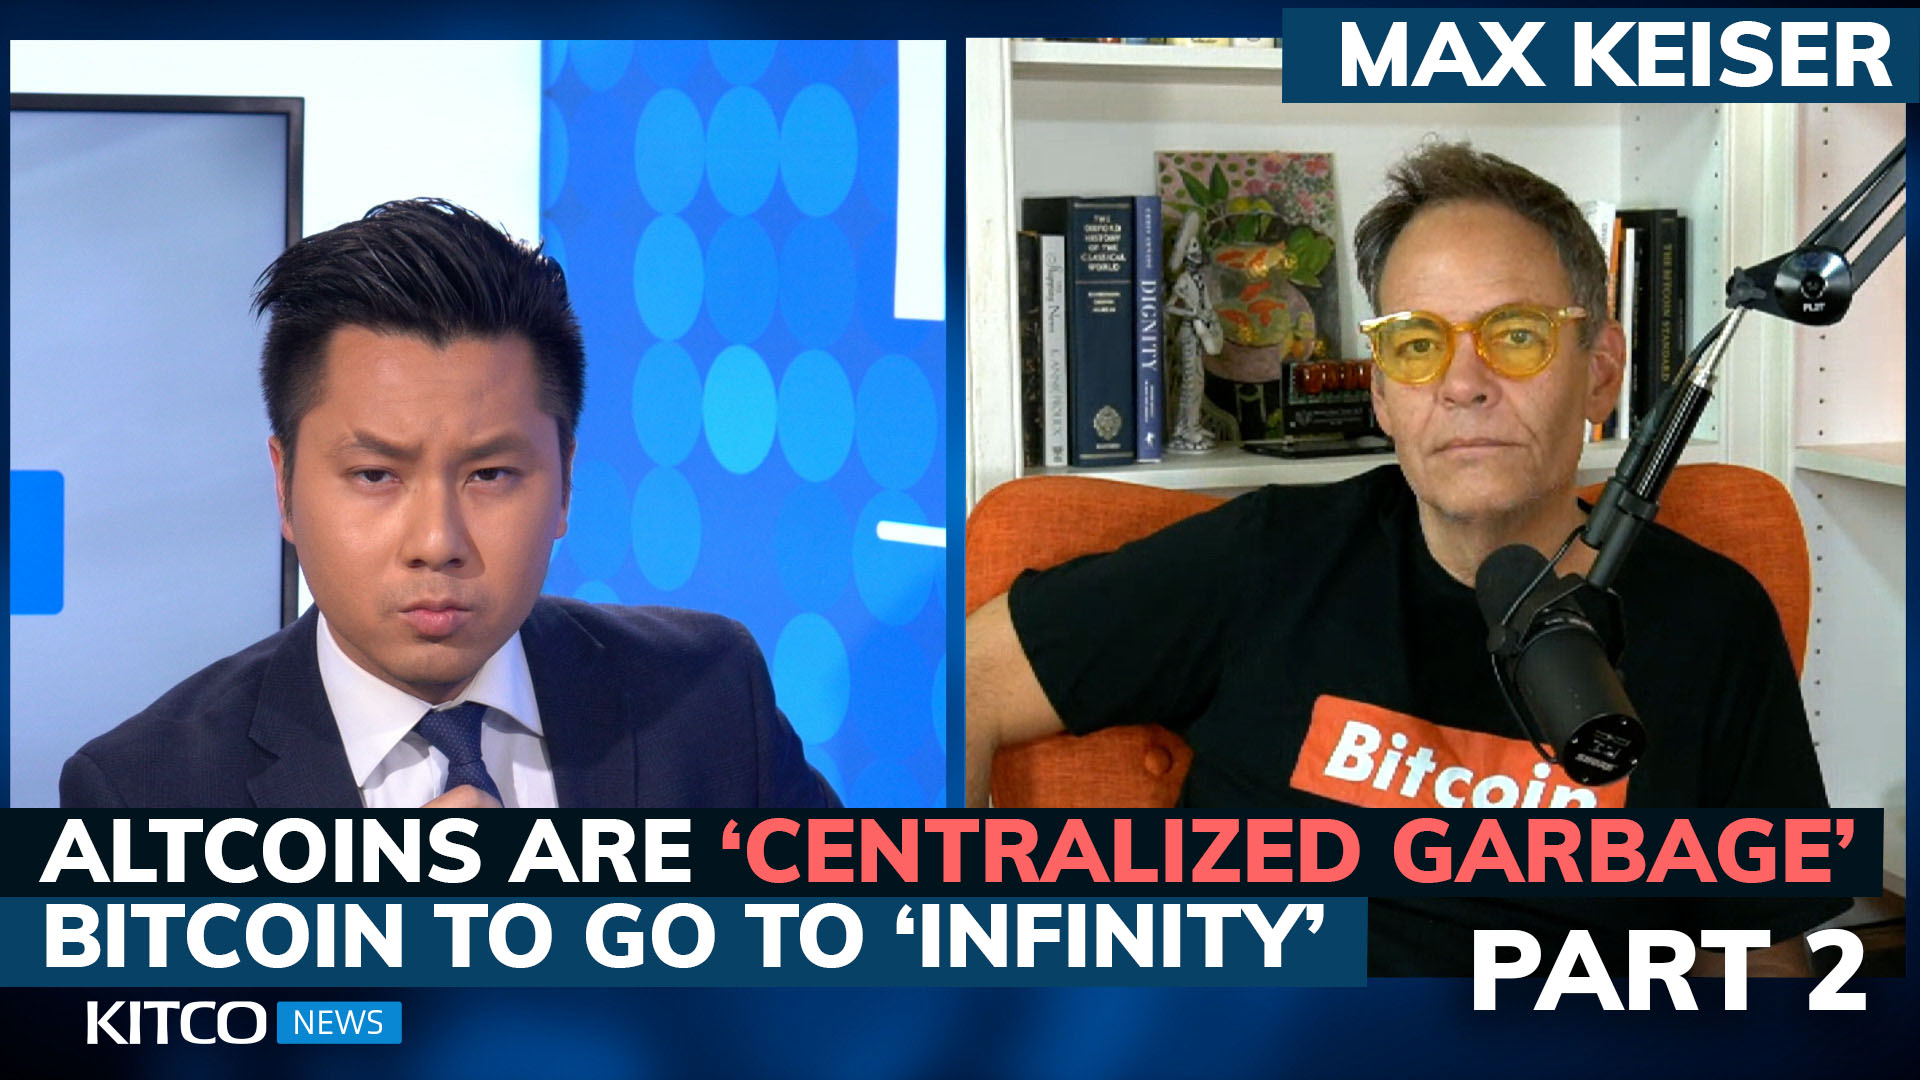 Bitcoin will beat gold by 100x, altcoins will get ‘shut down,’ go to 0 – Max Keiser